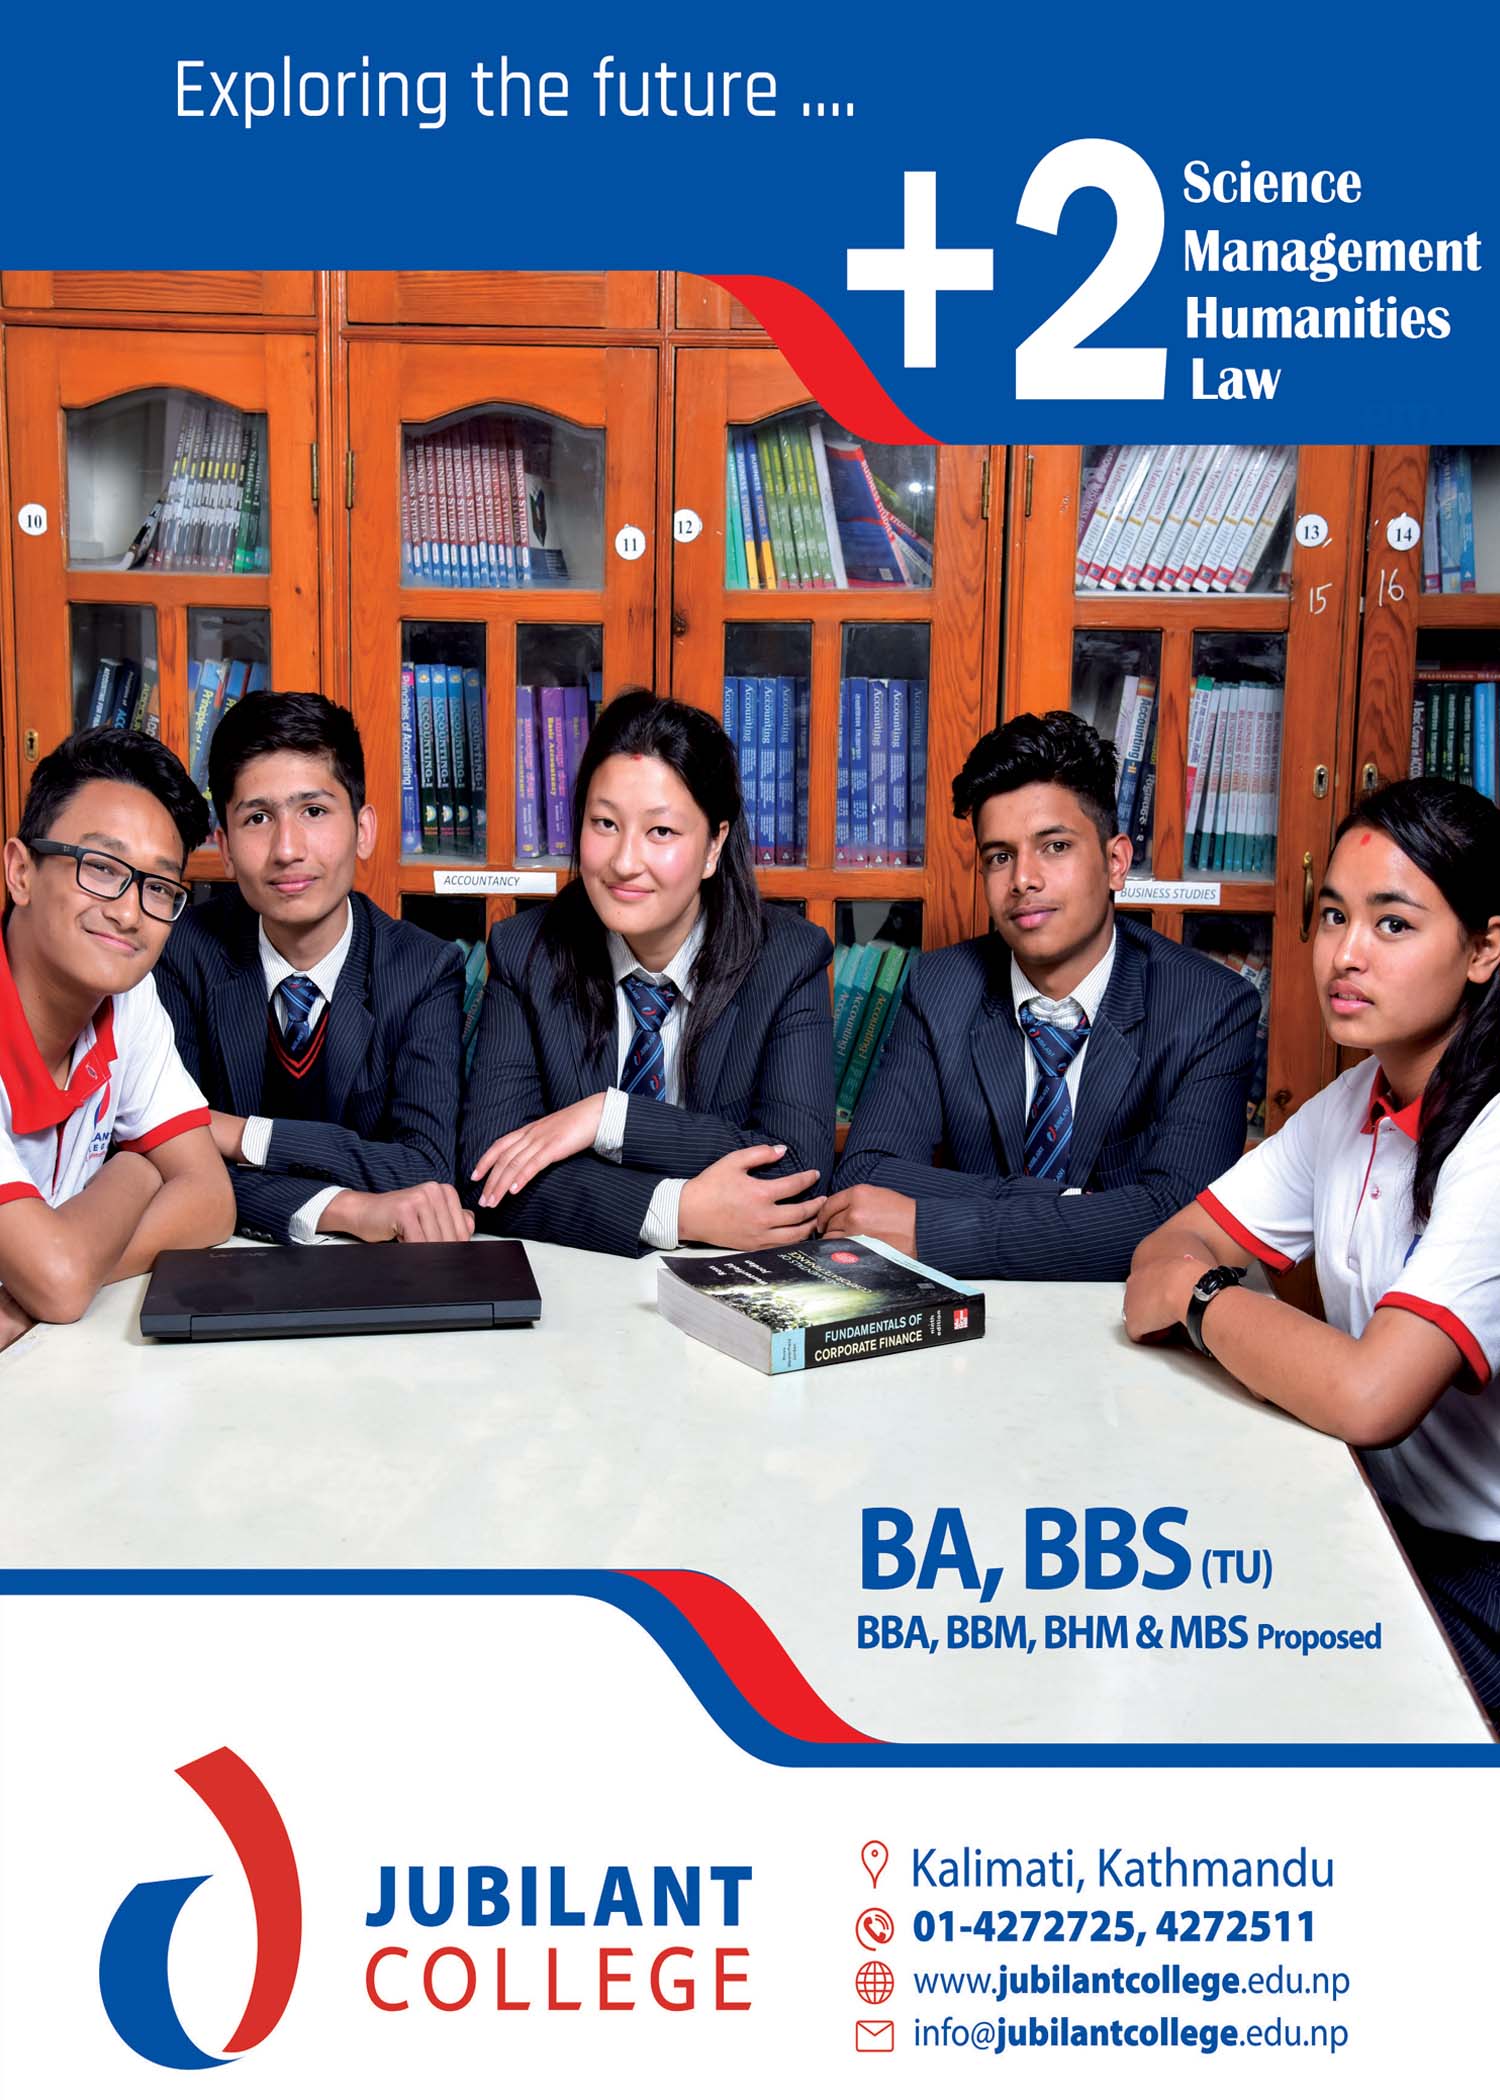 Pre-Registration for +2 Science/Management/Humanities/Law